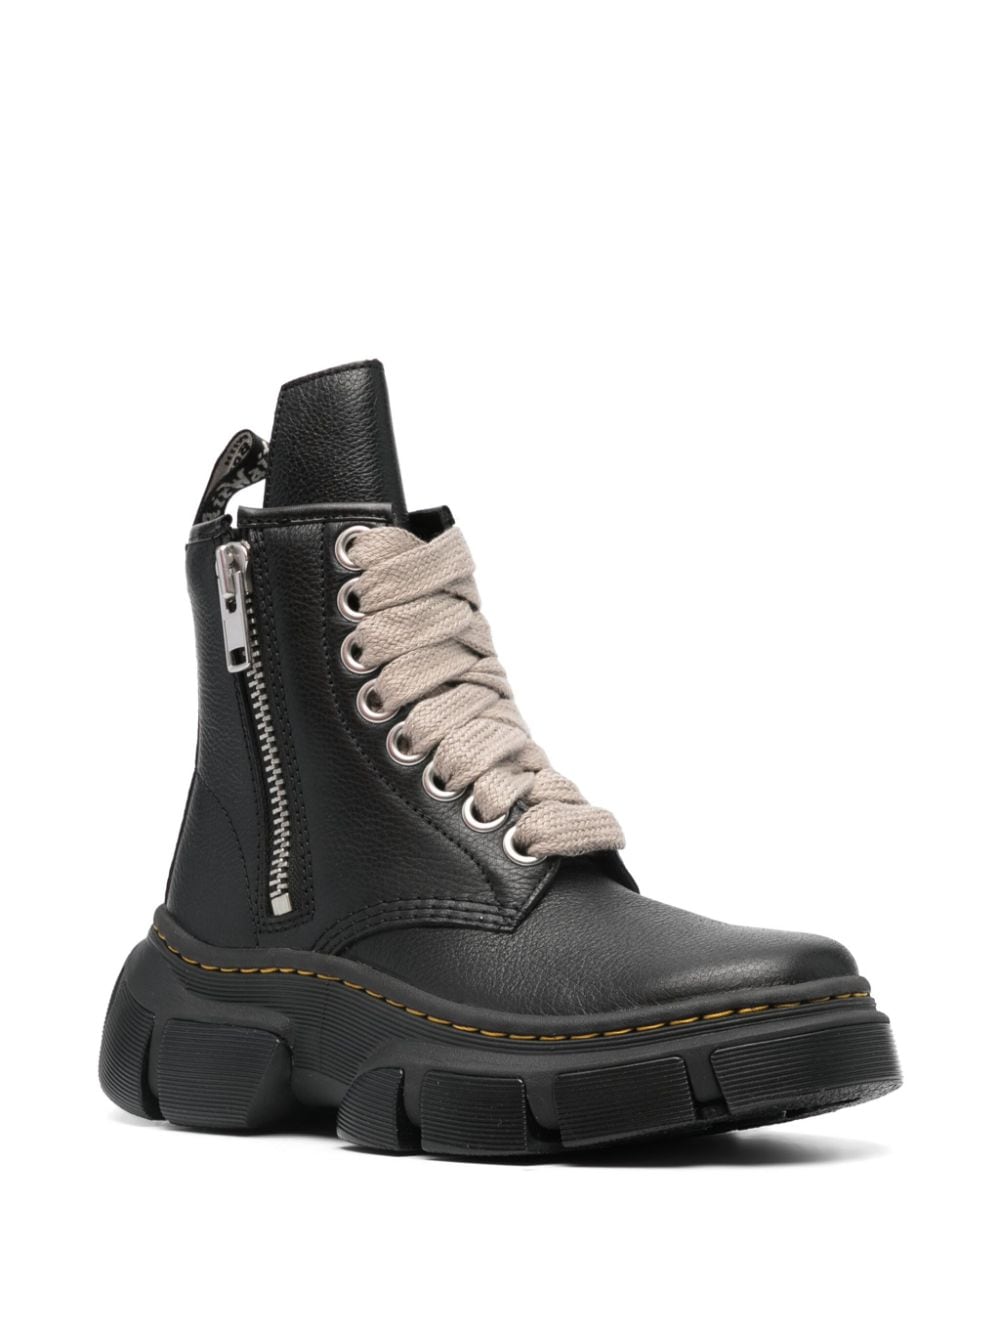 Image 2 of Dr. Martens x Rick Owens 1460 leather boots